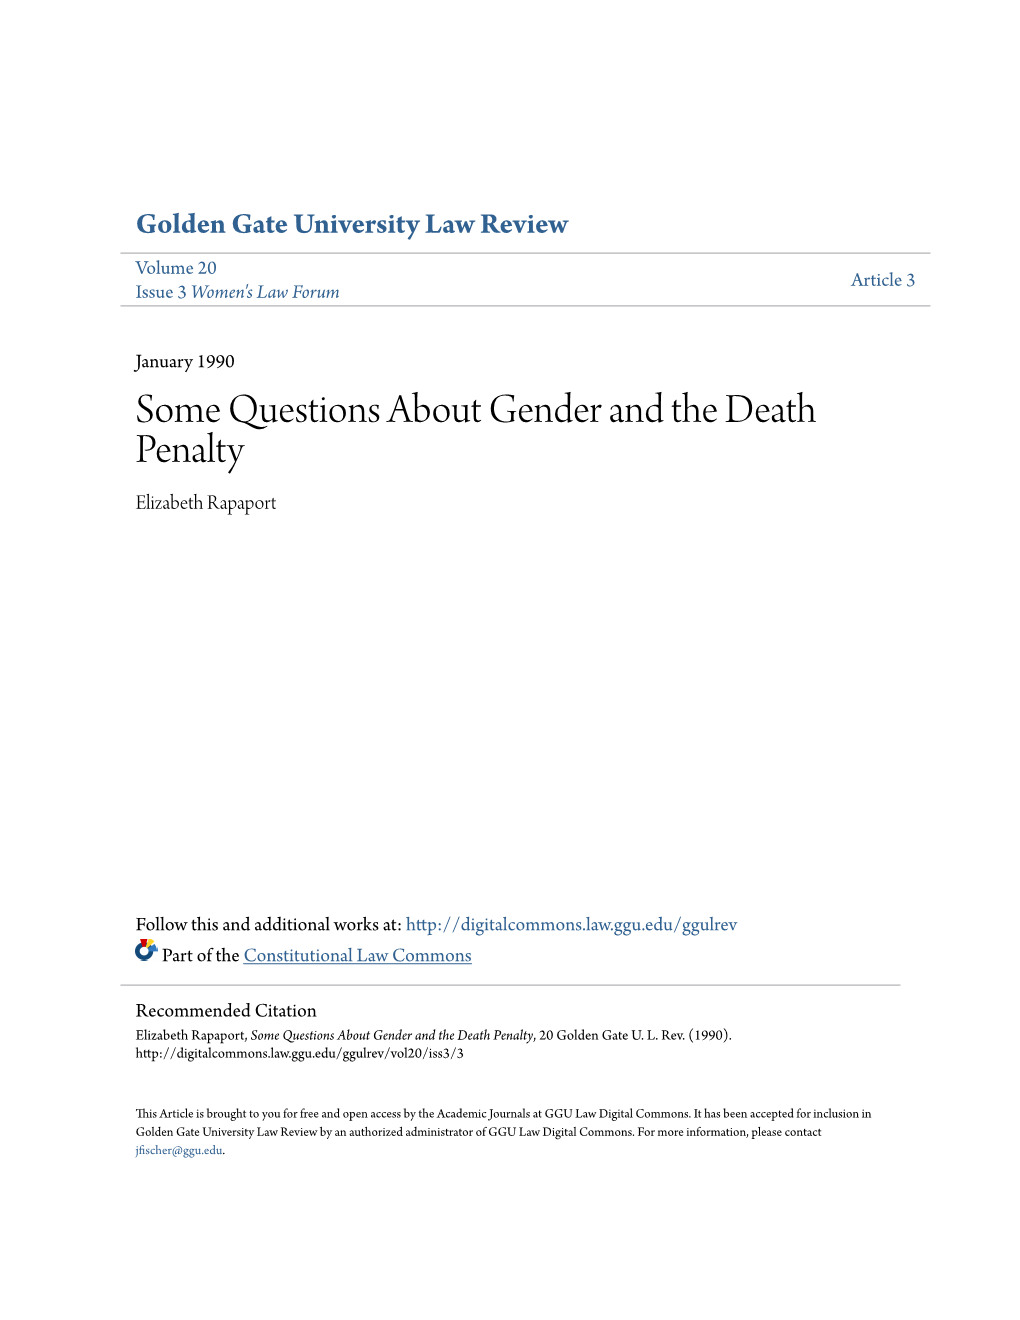 Some Questions About Gender and the Death Penalty Elizabeth Rapaport